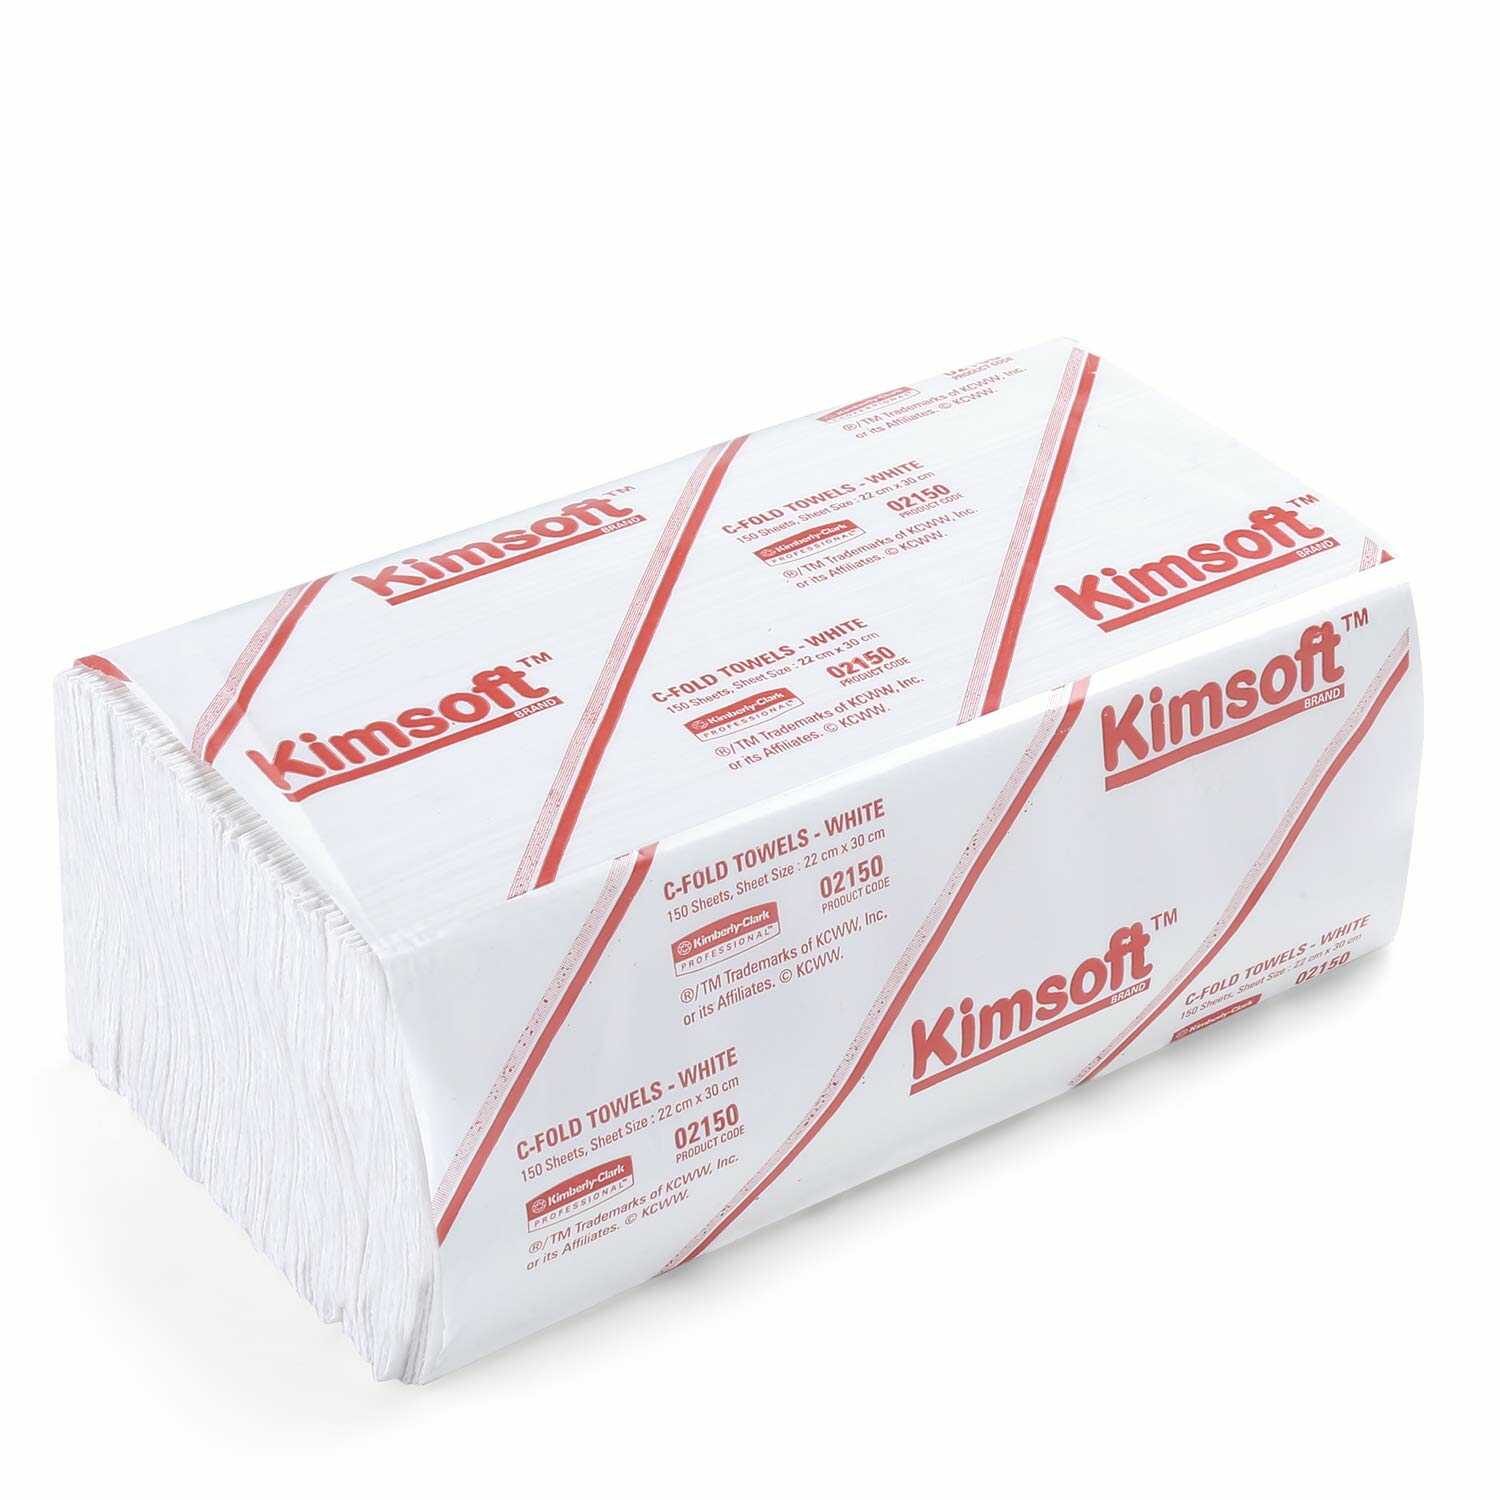 Kimberly Clark* Kimsoft* Compact Fold Hand Towels, 2150 (Pack of 20/Case, 150 Sheets/Pack, Total 3000 Sheets)